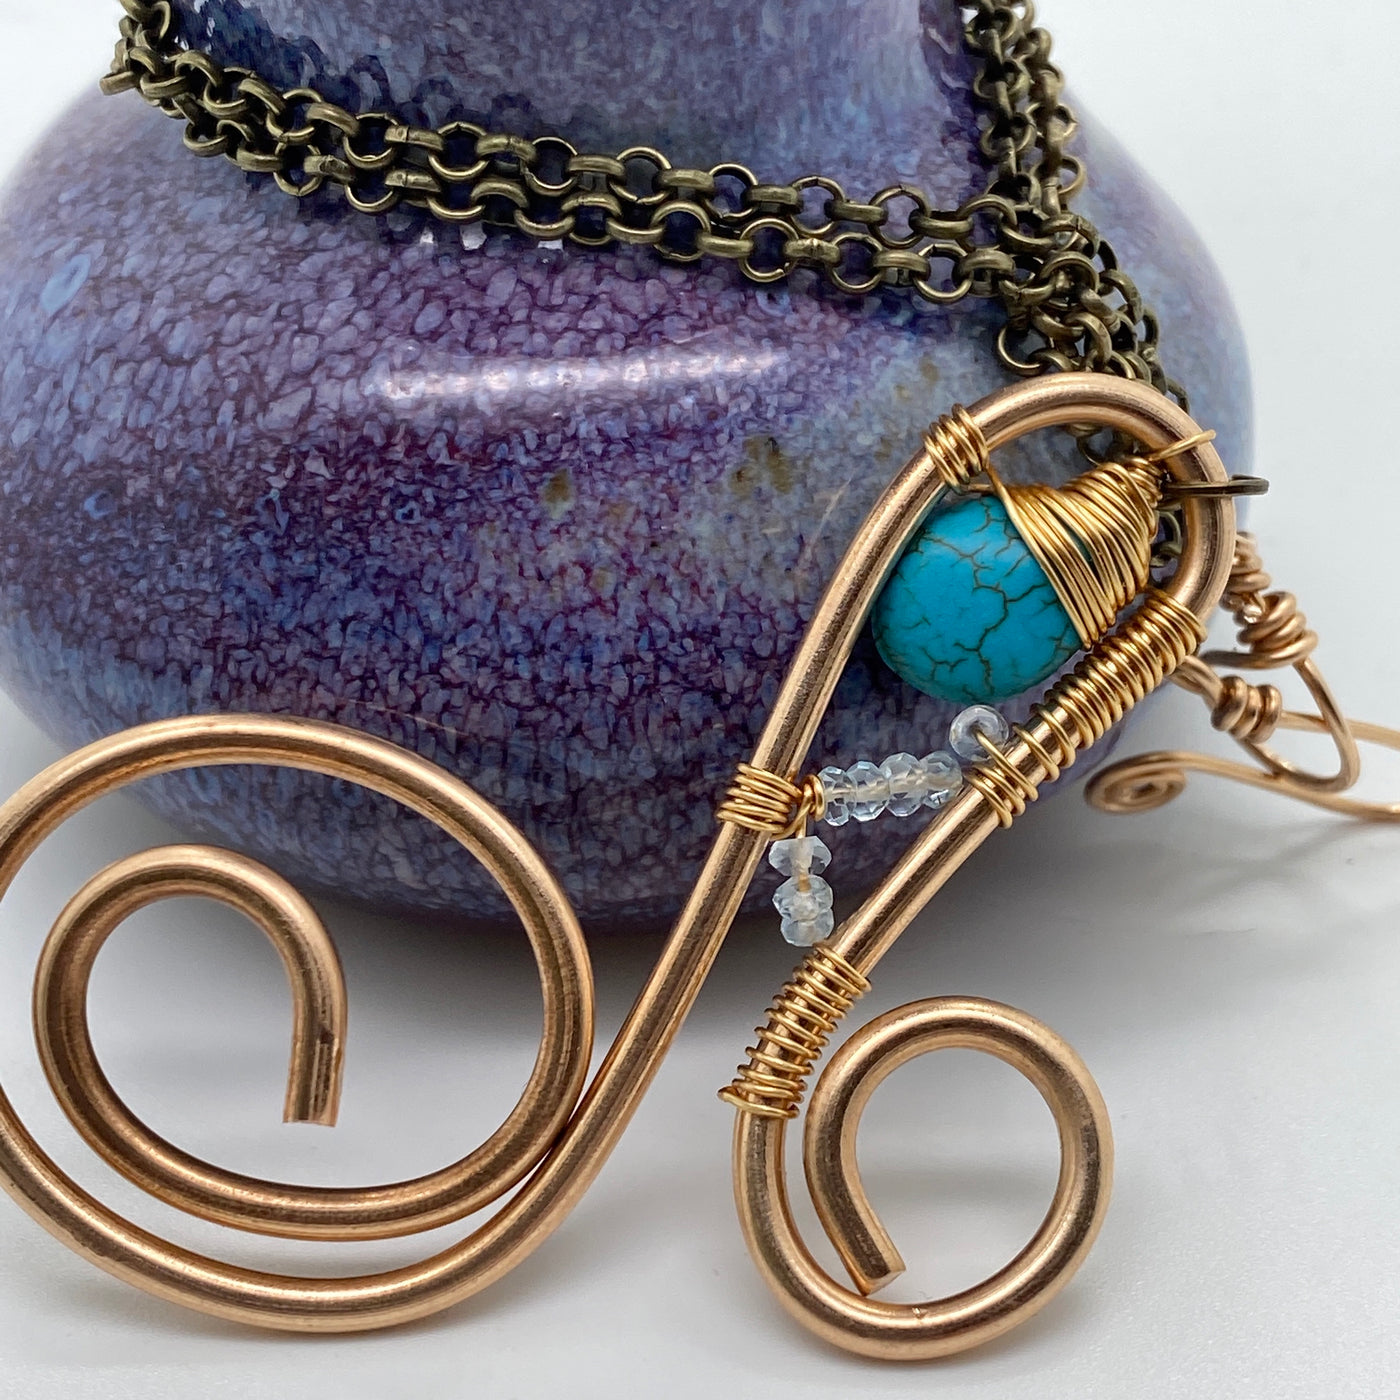 Large bronze wire and turquoise pendant